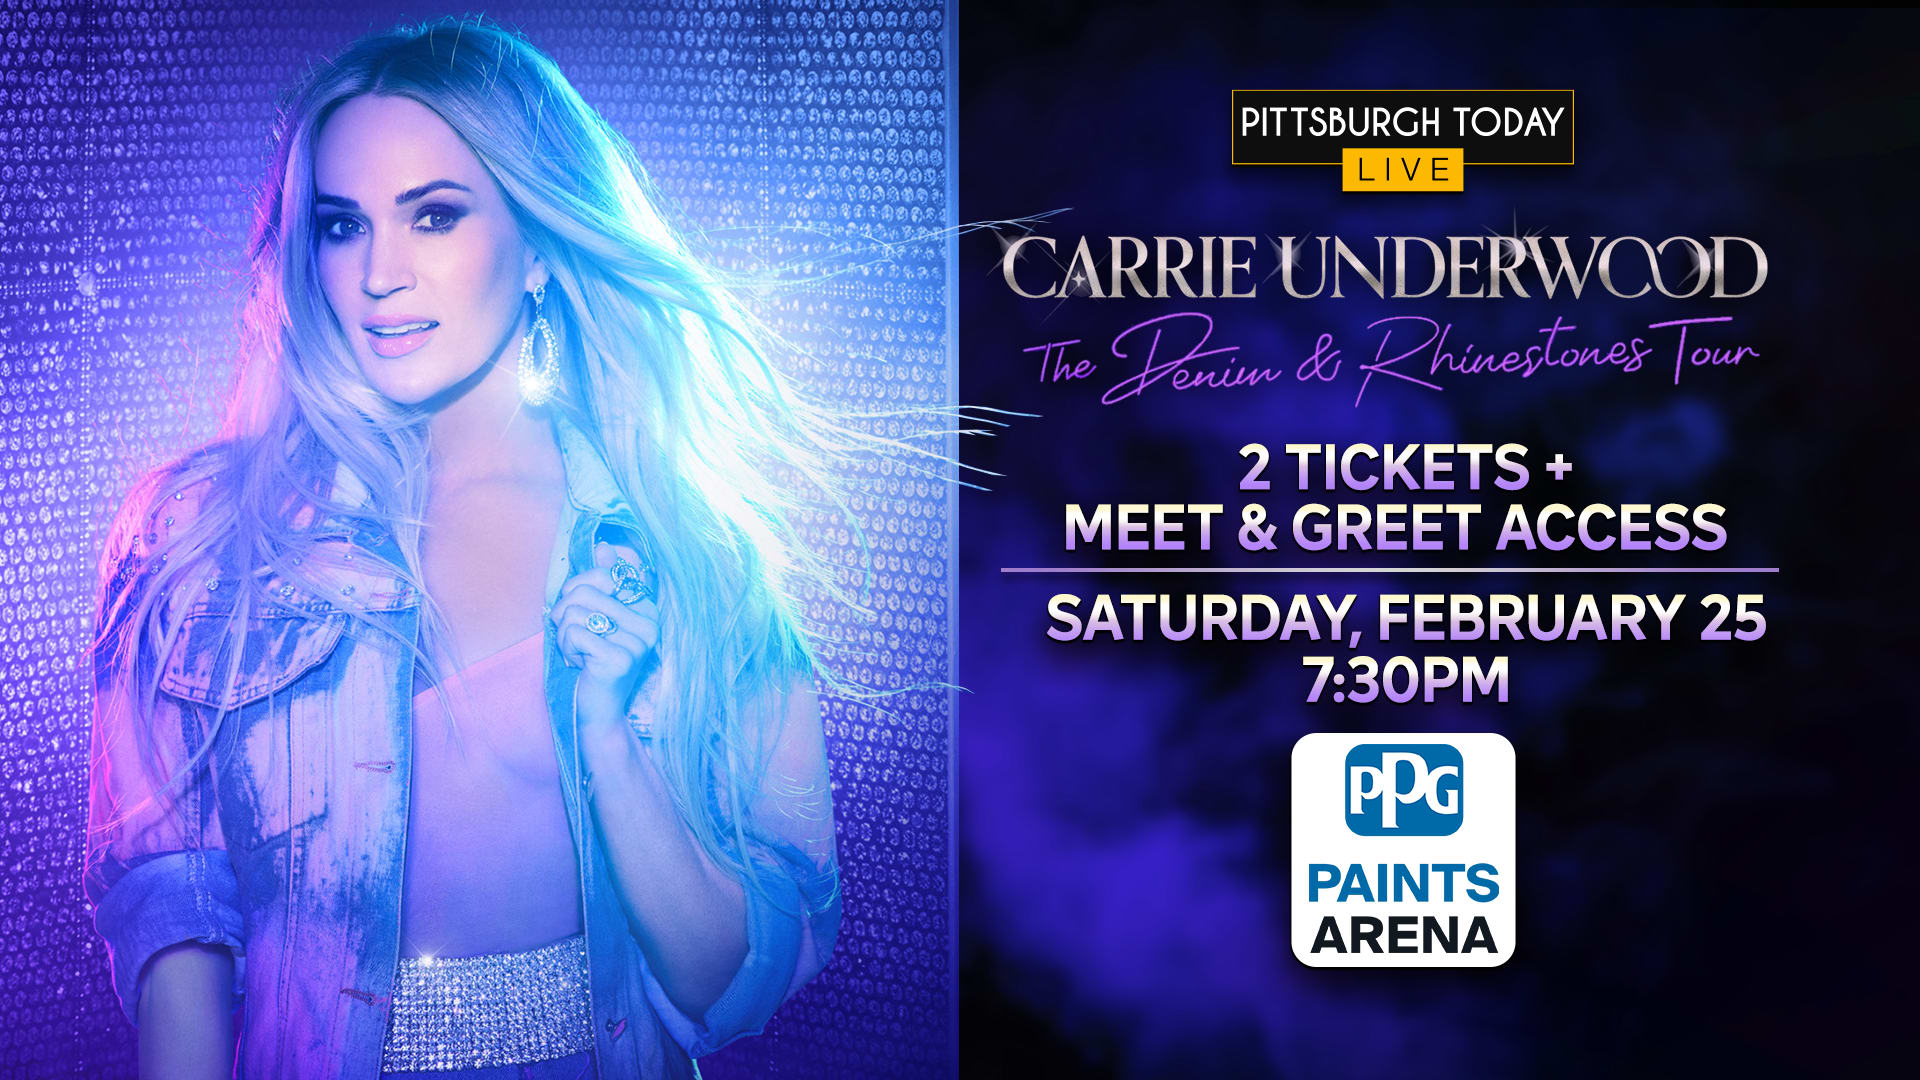 PTL's Carrie Underwood 'The Denim & Rhinestone Tour' Ticket Giveaway - CBS  Pittsburgh